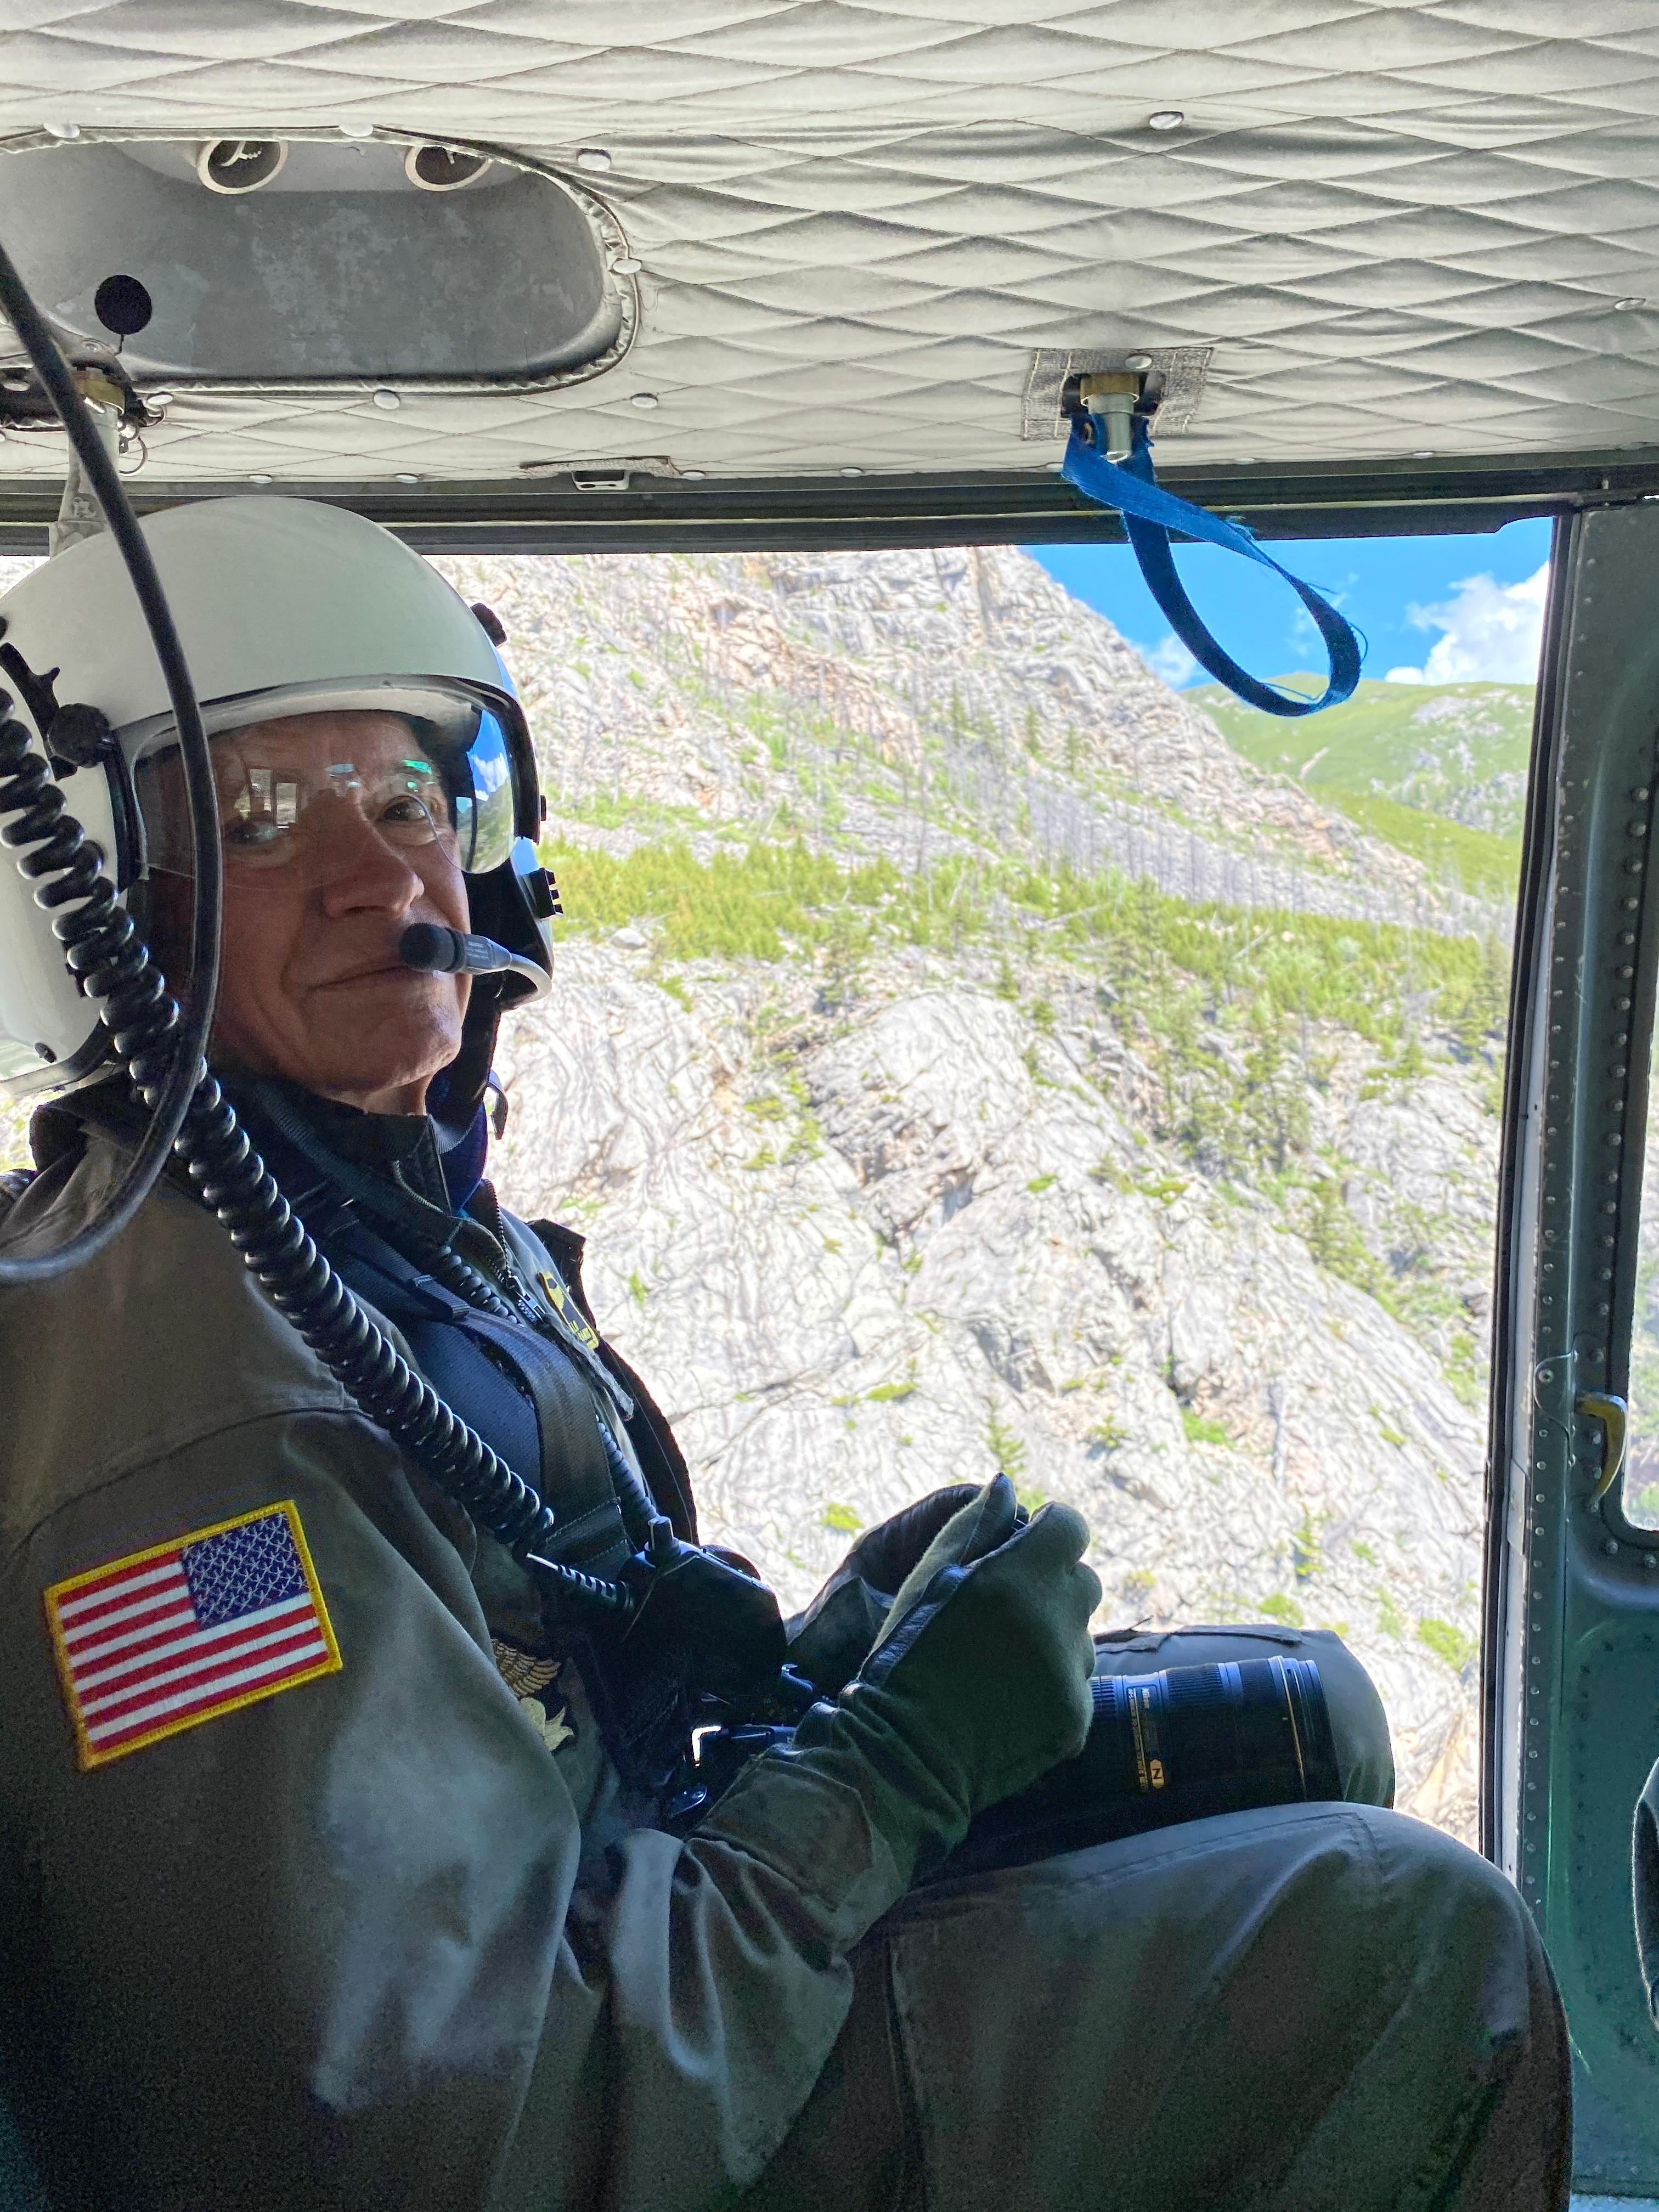 Man in green flight suit and white flight helmet seated screen left in a helicopter, mountains visible out of open door.